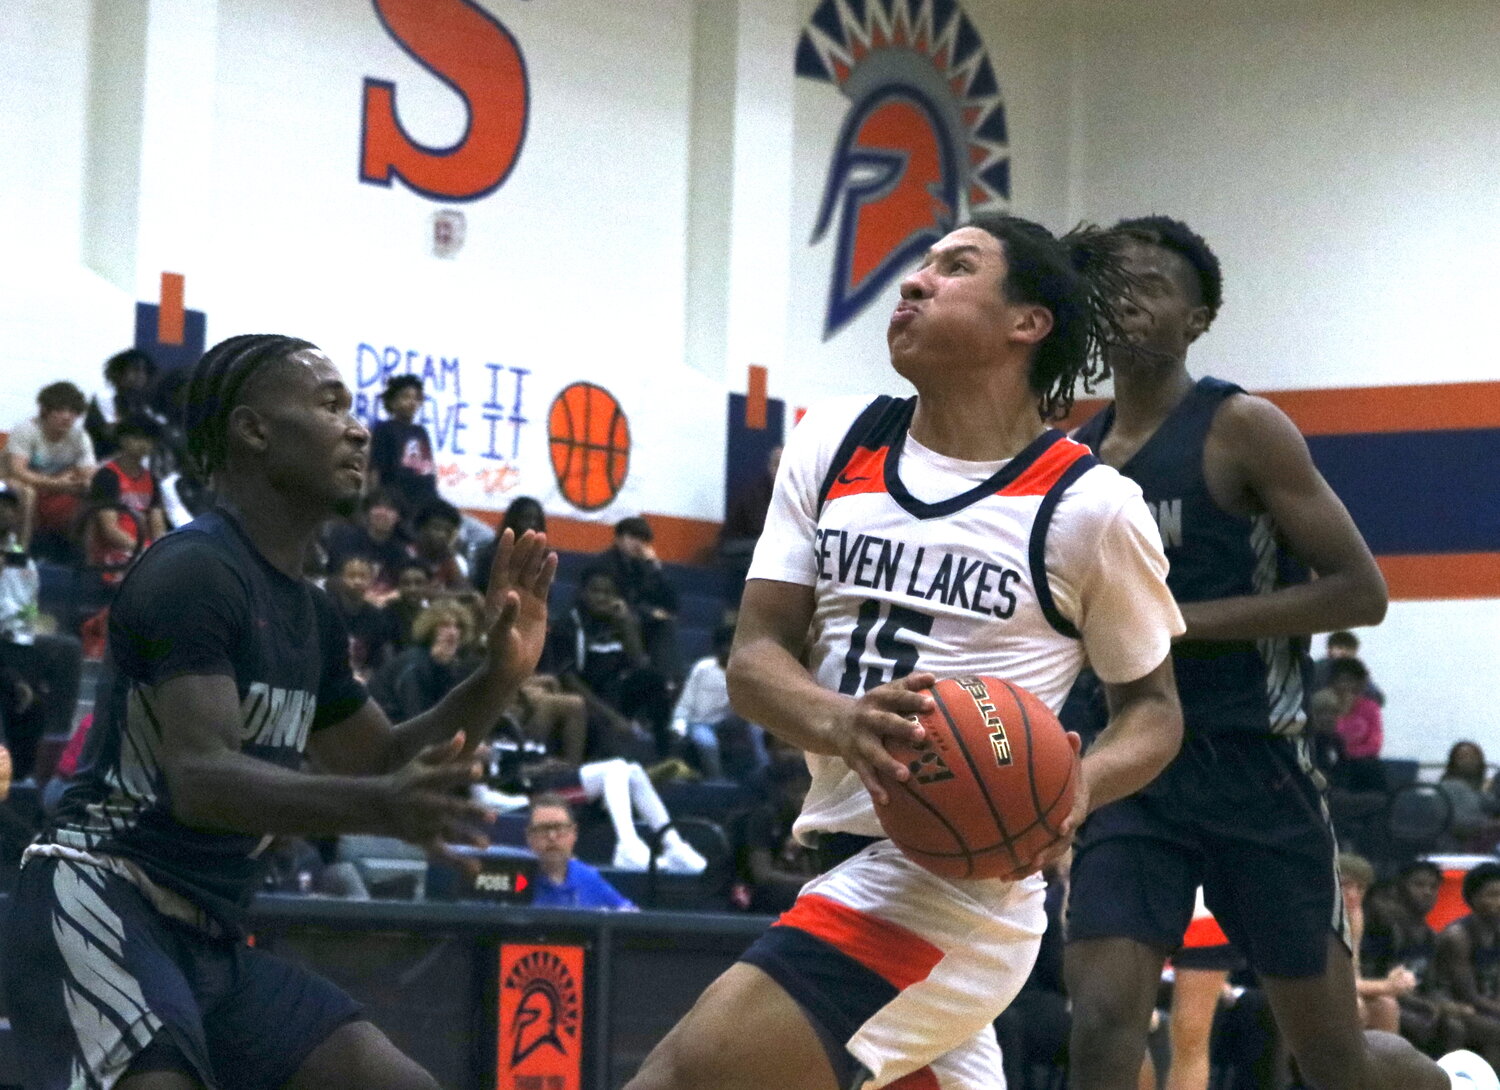 Isaiah Santos drives to the basket during Monday's game between Seven Lakes and Pearland Dawson at the Seven Lakes gym.